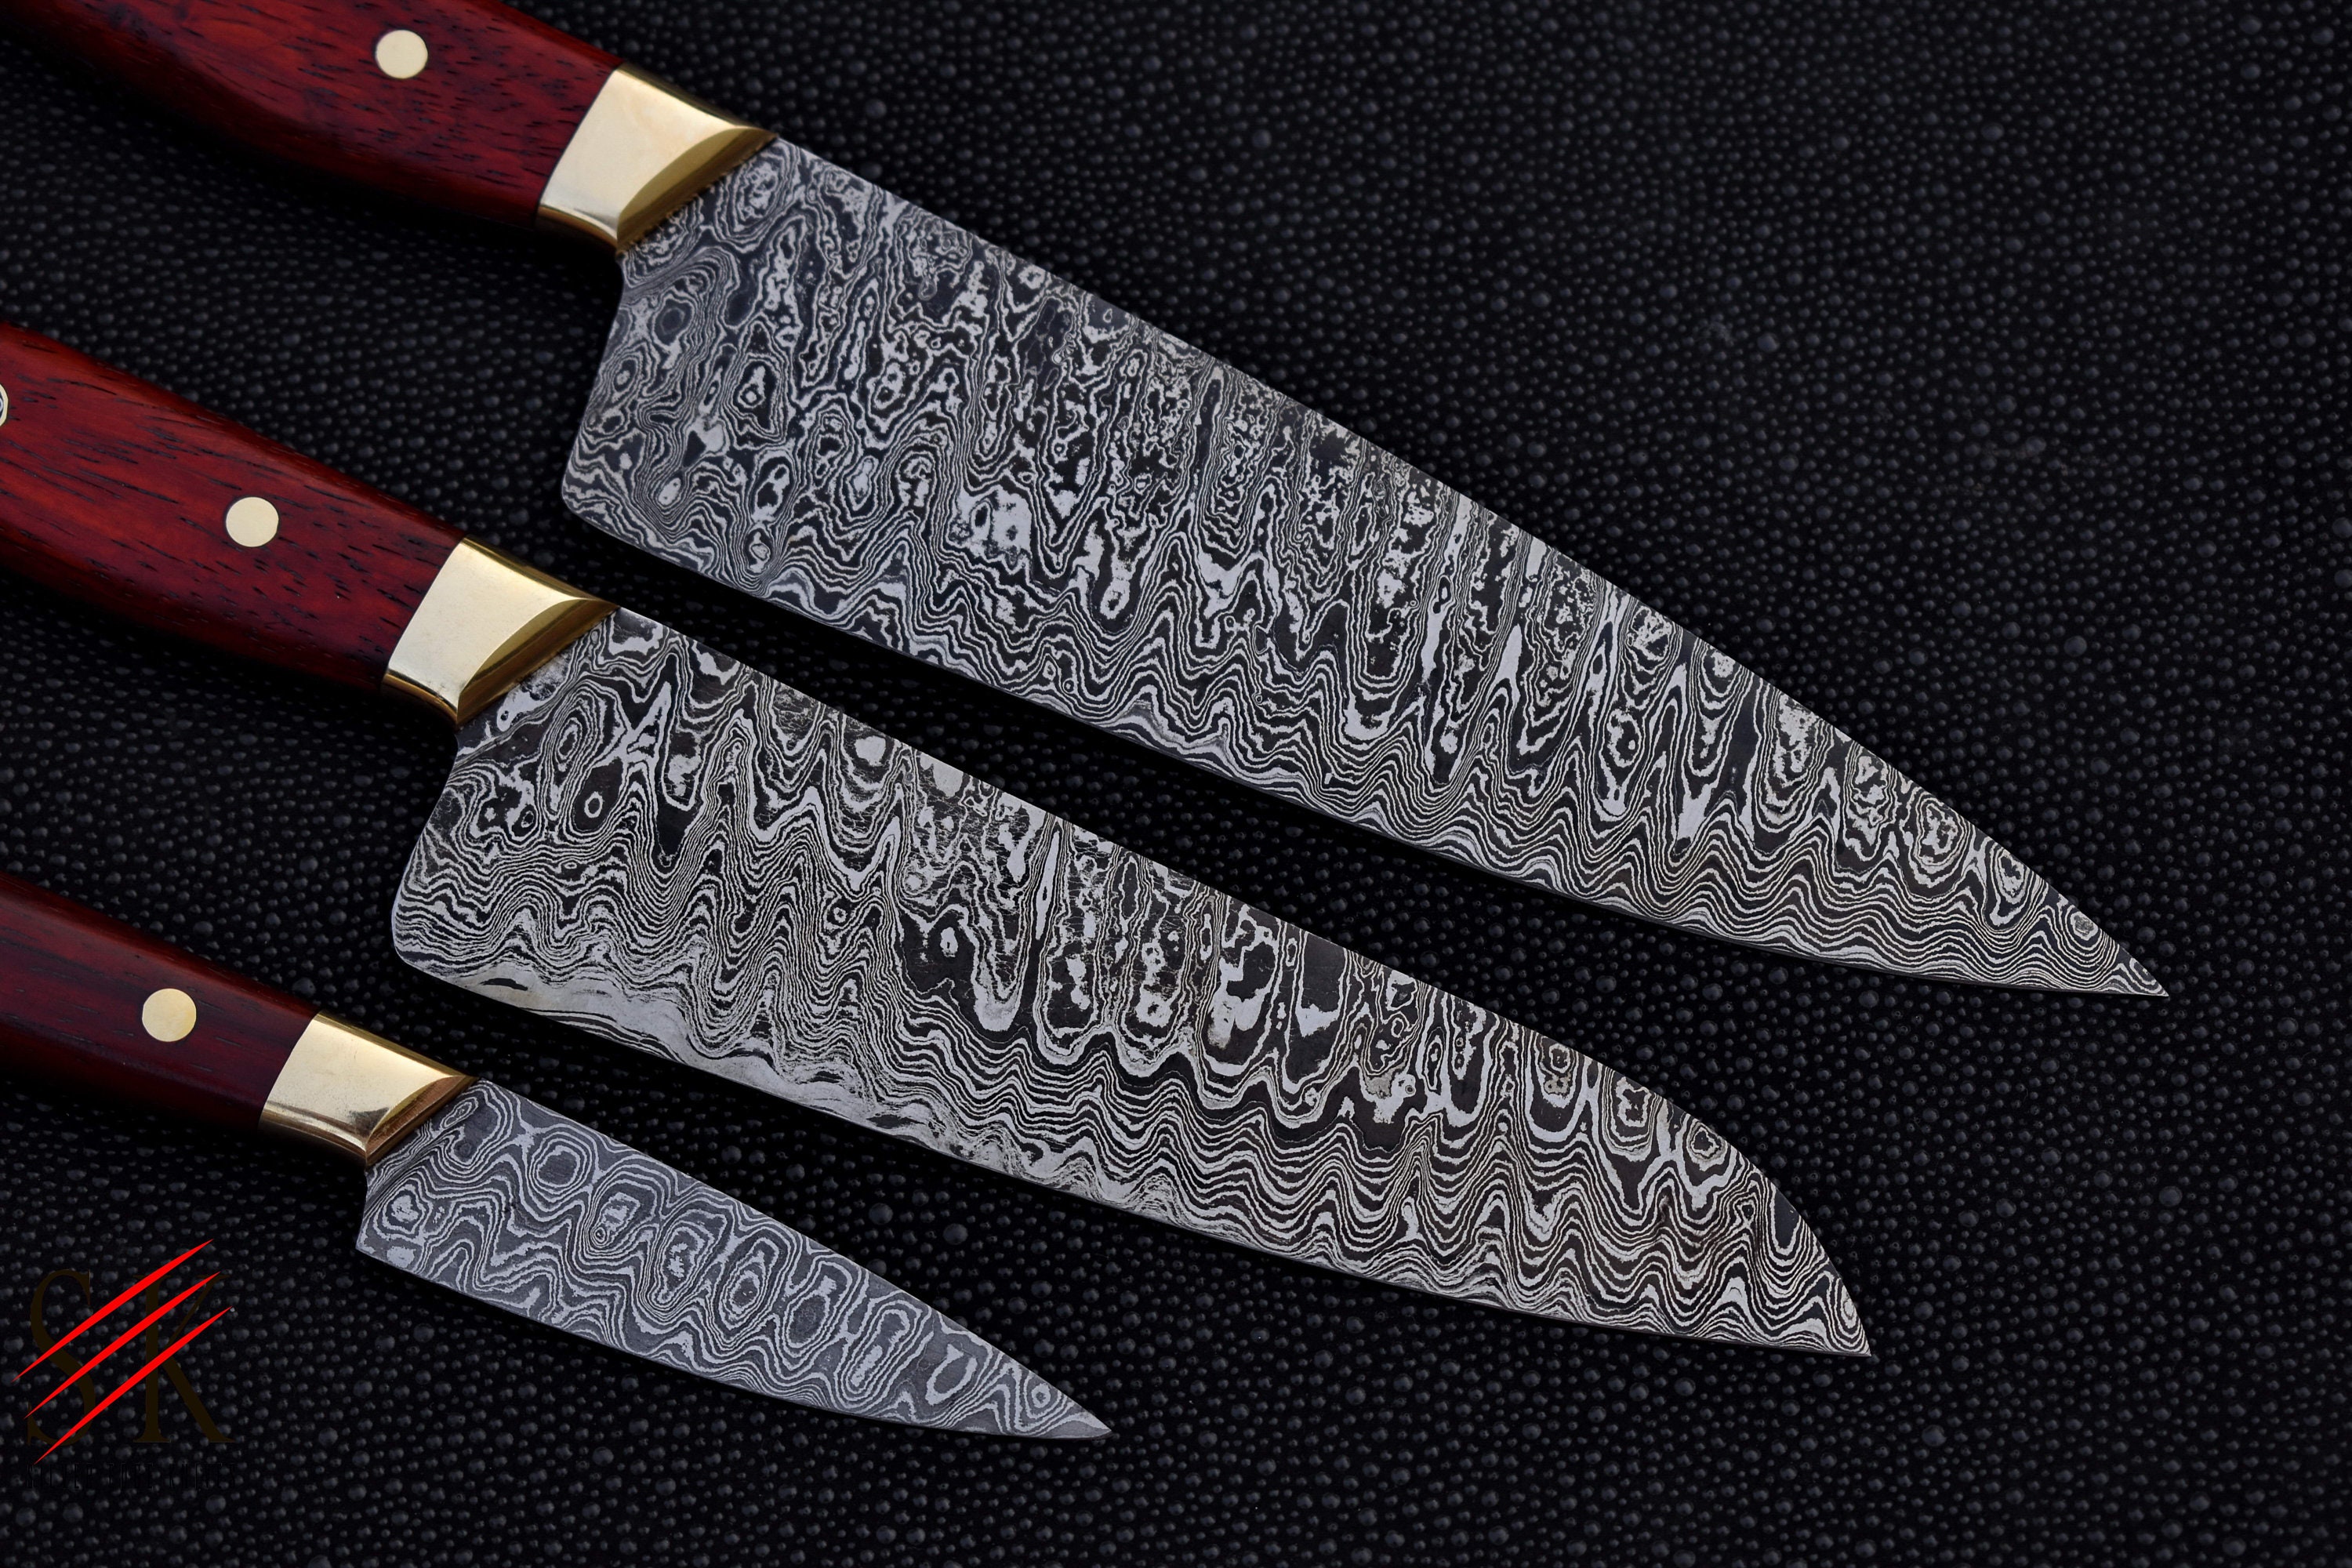  3-Piece Knives Set for Kitchen, Stainless Laser-Etched Damascus Knife  Set With Professional Chef Knife, Santoku Knife, & Paring Knife, Kitchen  Knifes In Luxury Wooden Box, Gifts for Chefs - Breliser: Home